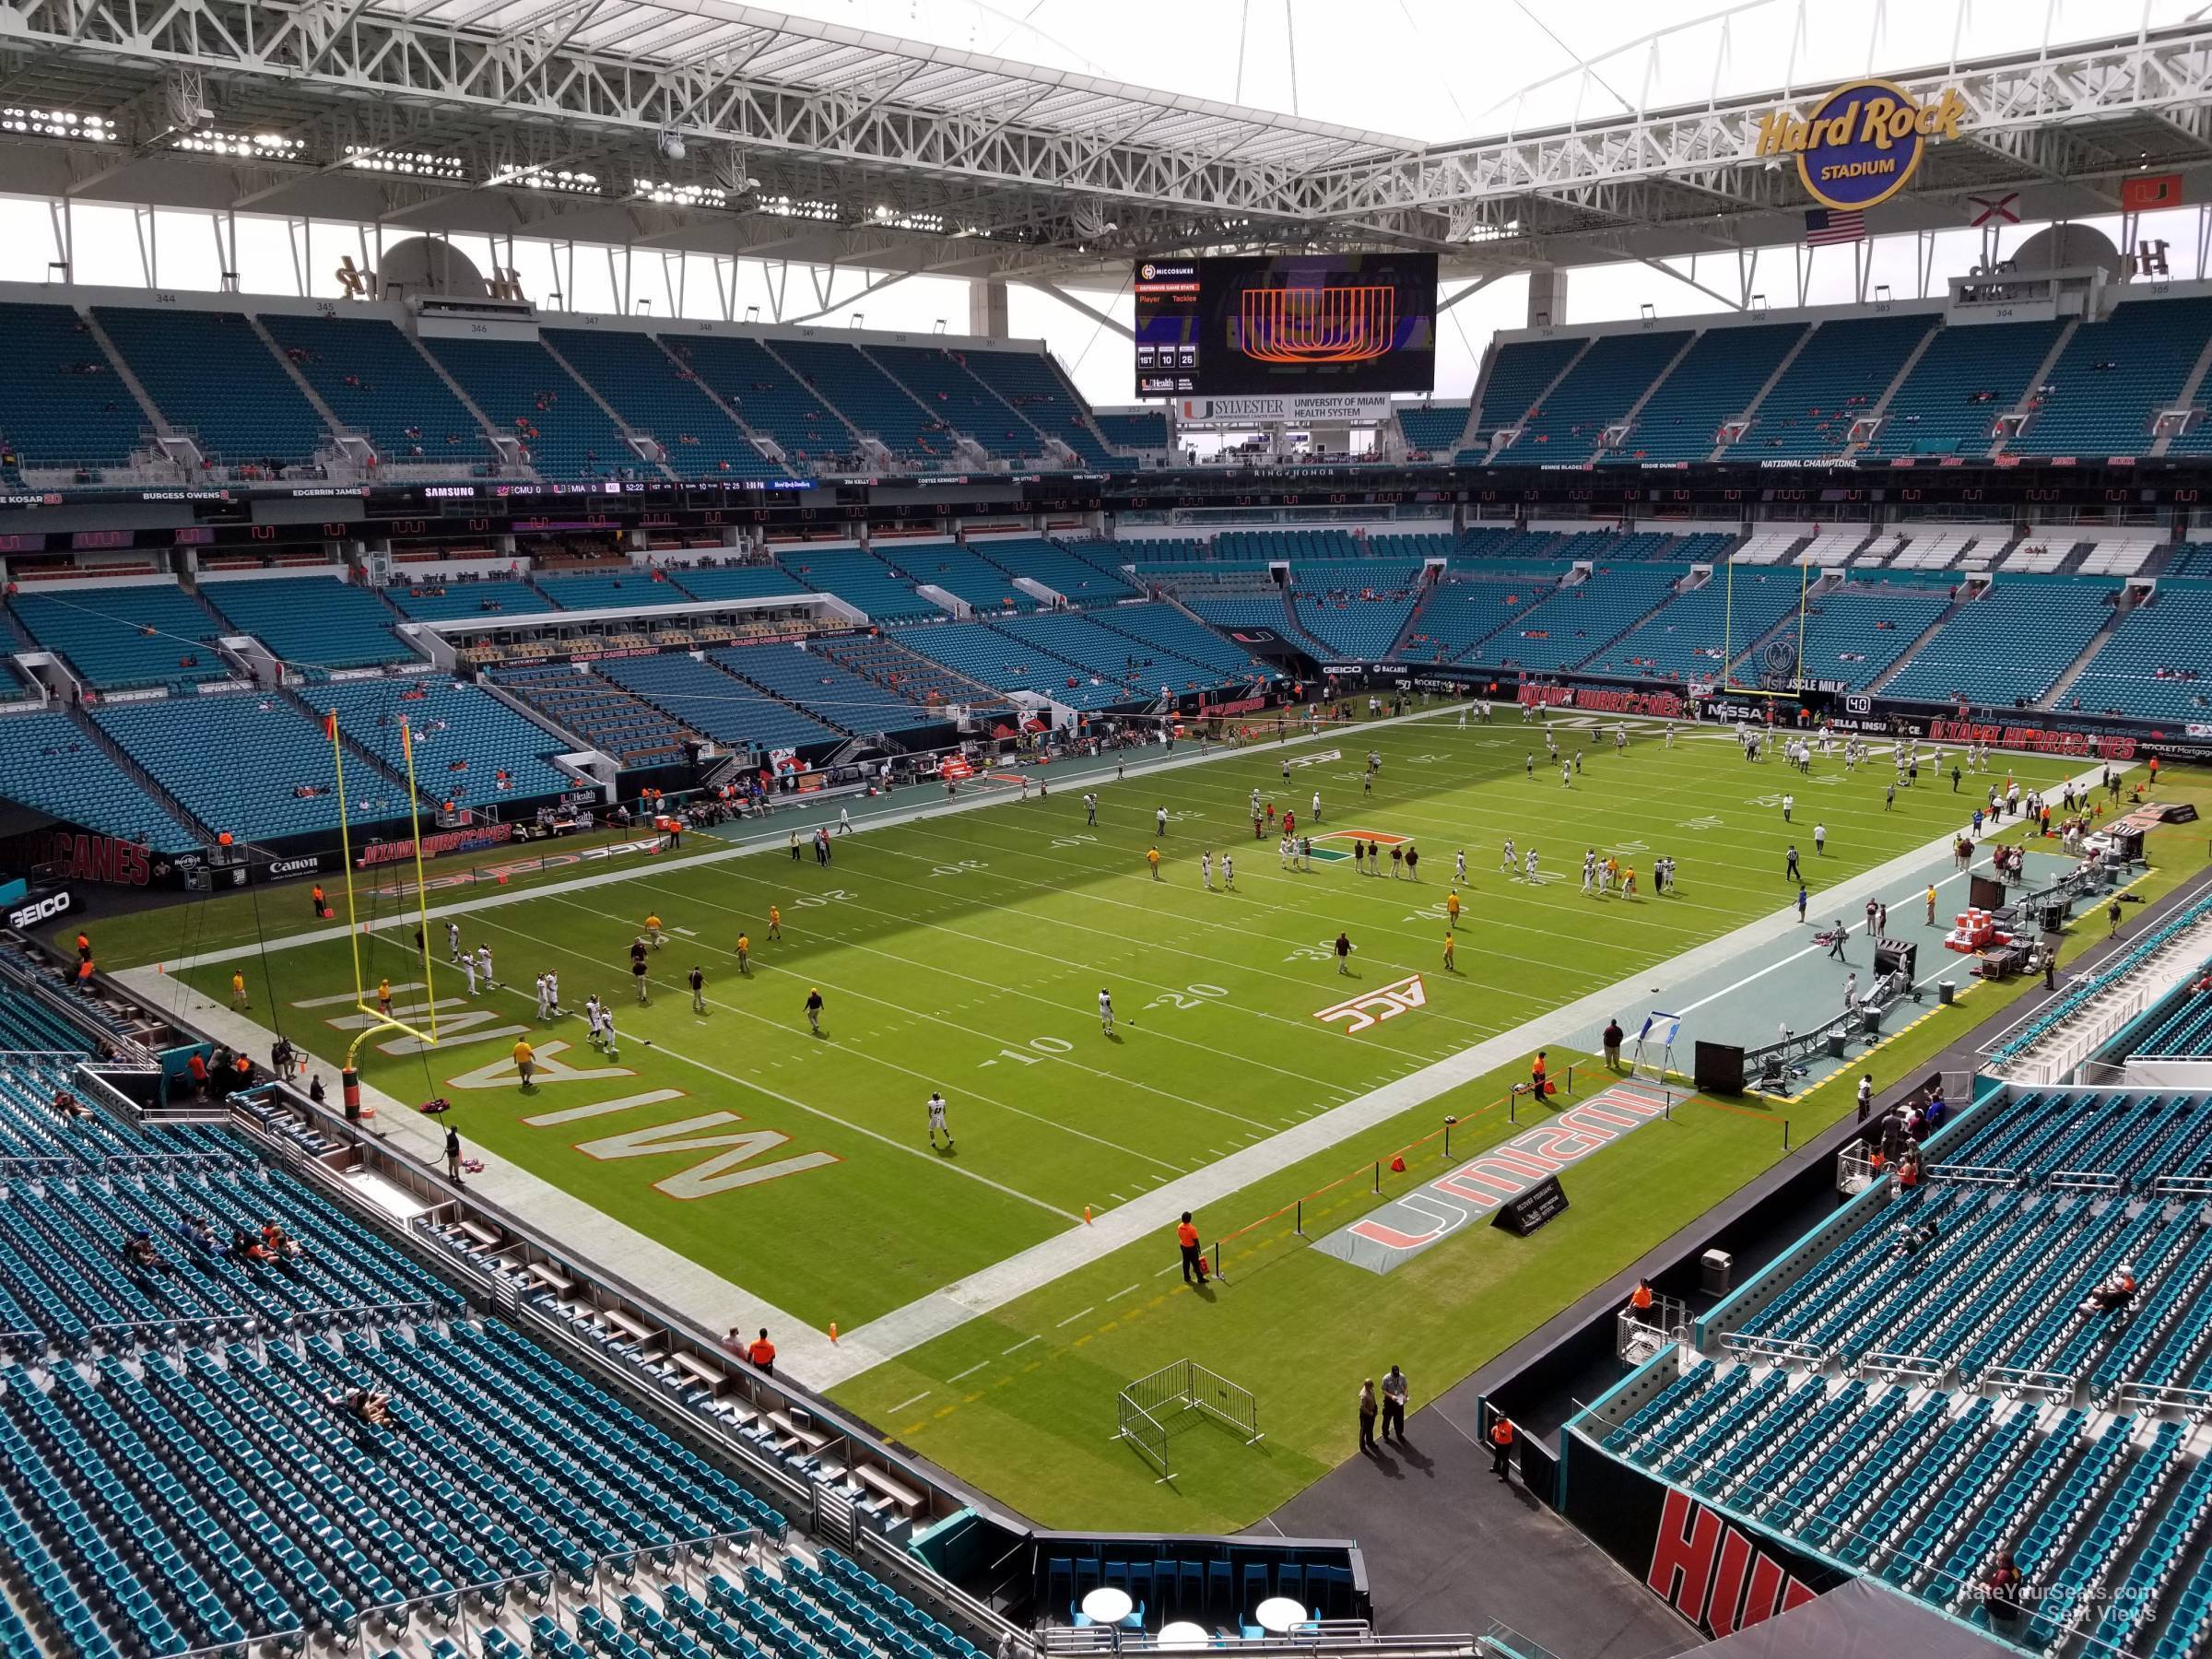 section 326, row 2w seat view  for football - hard rock stadium